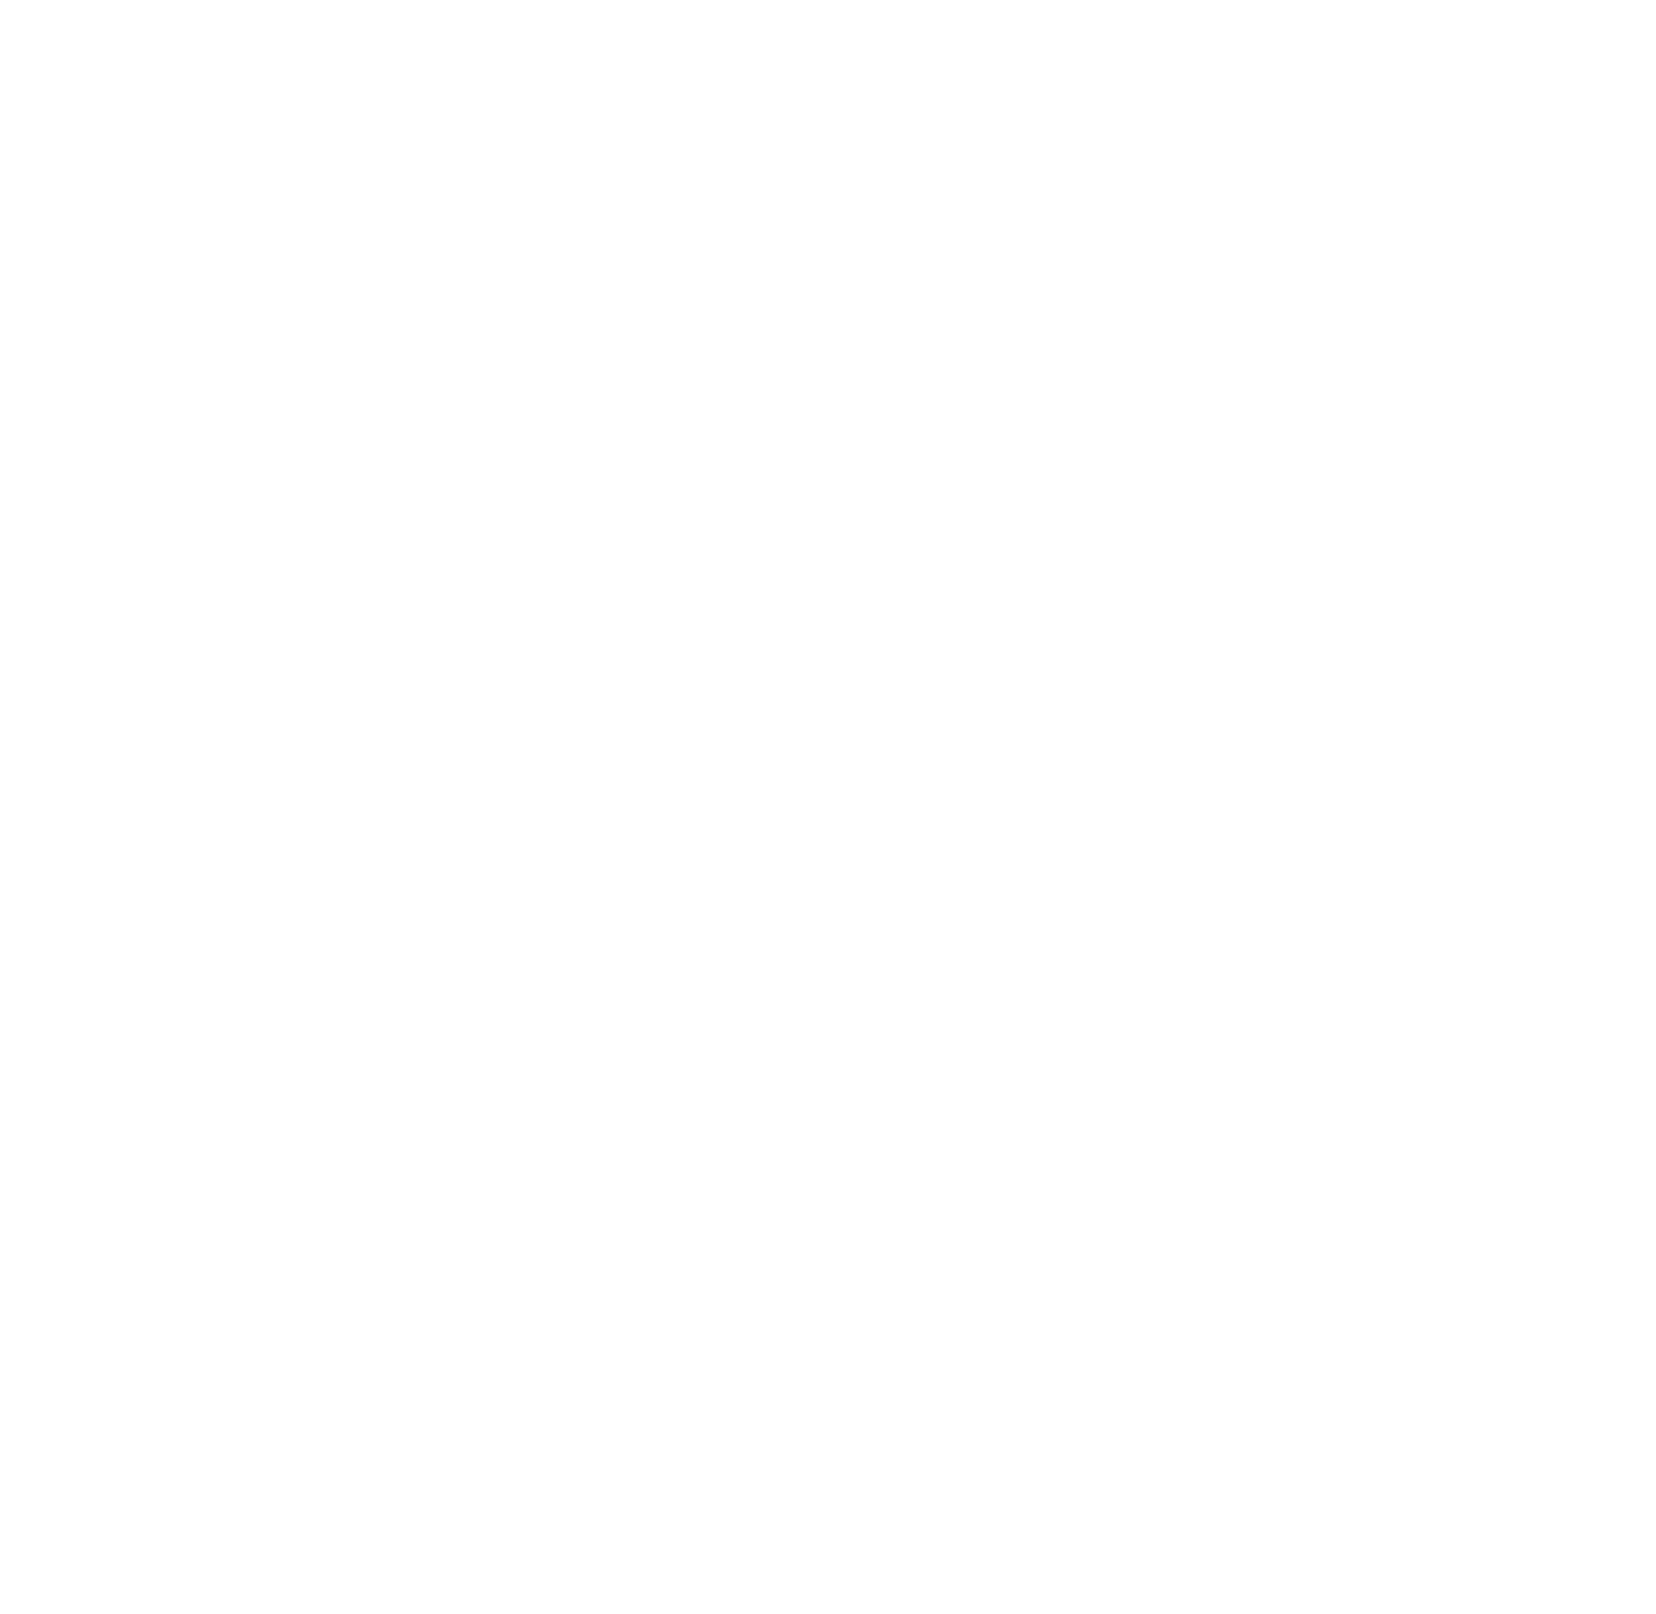 Nolo Ortho logo for orthopaedic practice in Nolensville, TN